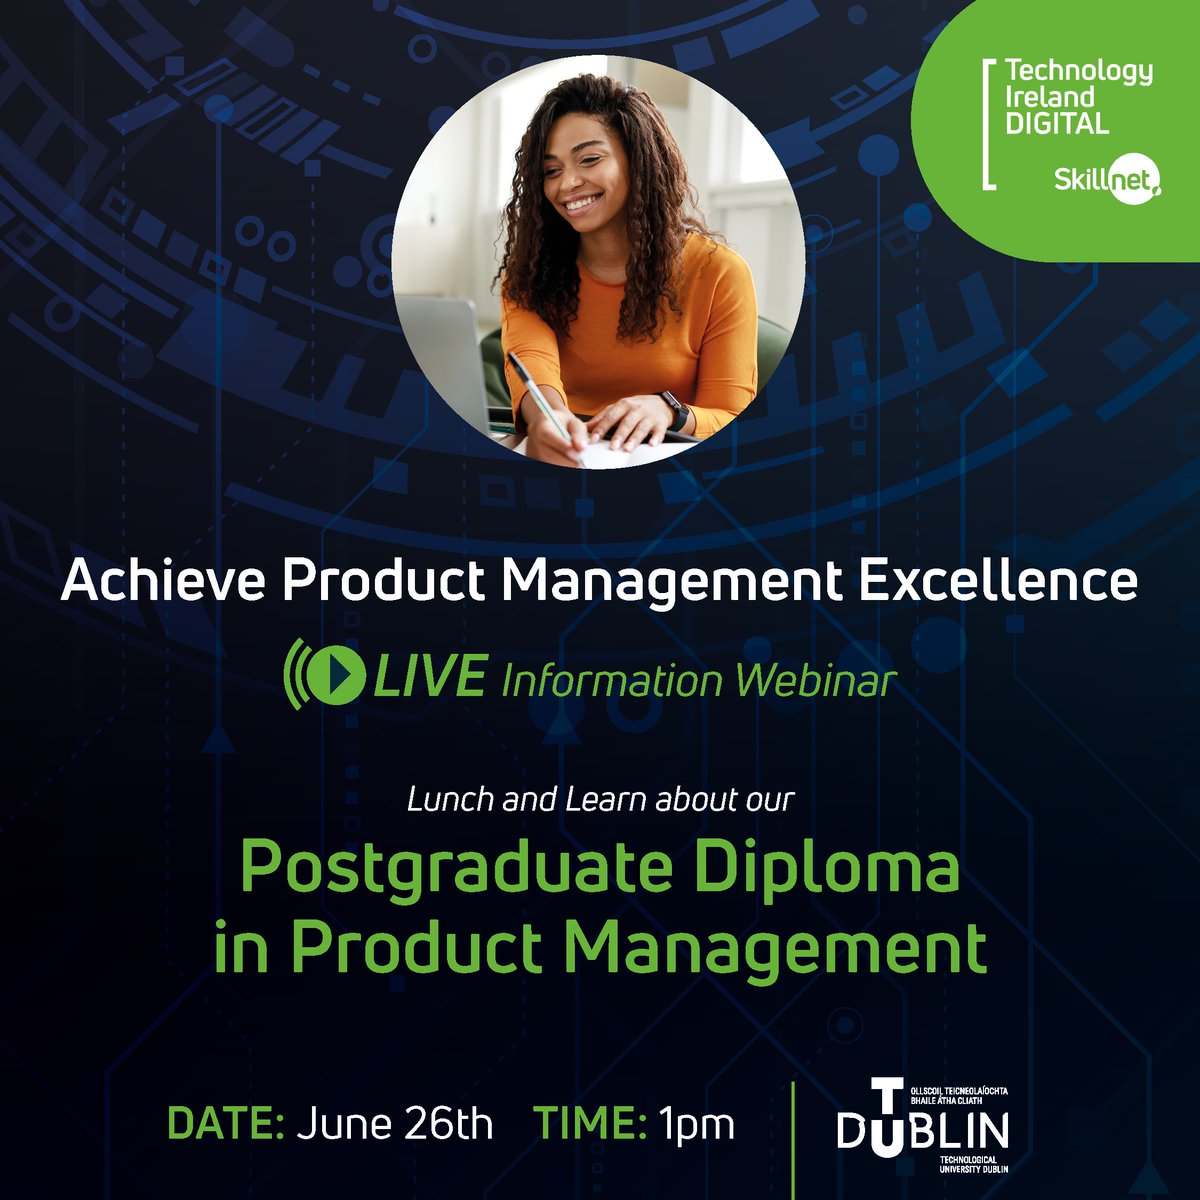 JOIN US TODAY AT 1PM! There's still time to sign up for today's Lunch + Learn session dedicated to our Postgraduate Diploma in Product Management. bit.ly/45QErbn #productmanagement #TechIreland